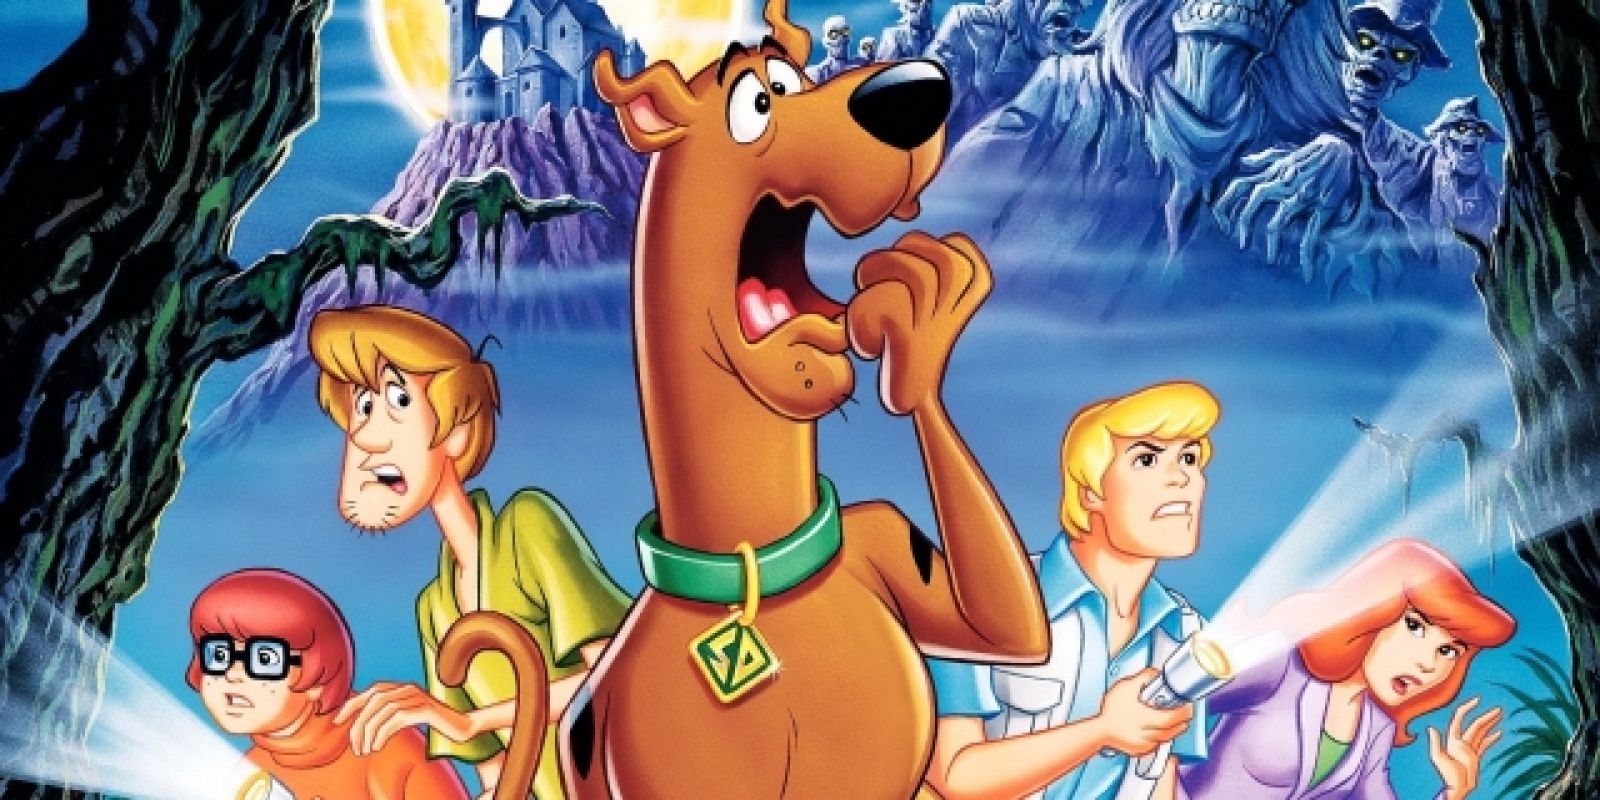 New Scoob! Image Reveal First Look At Fred And Velma